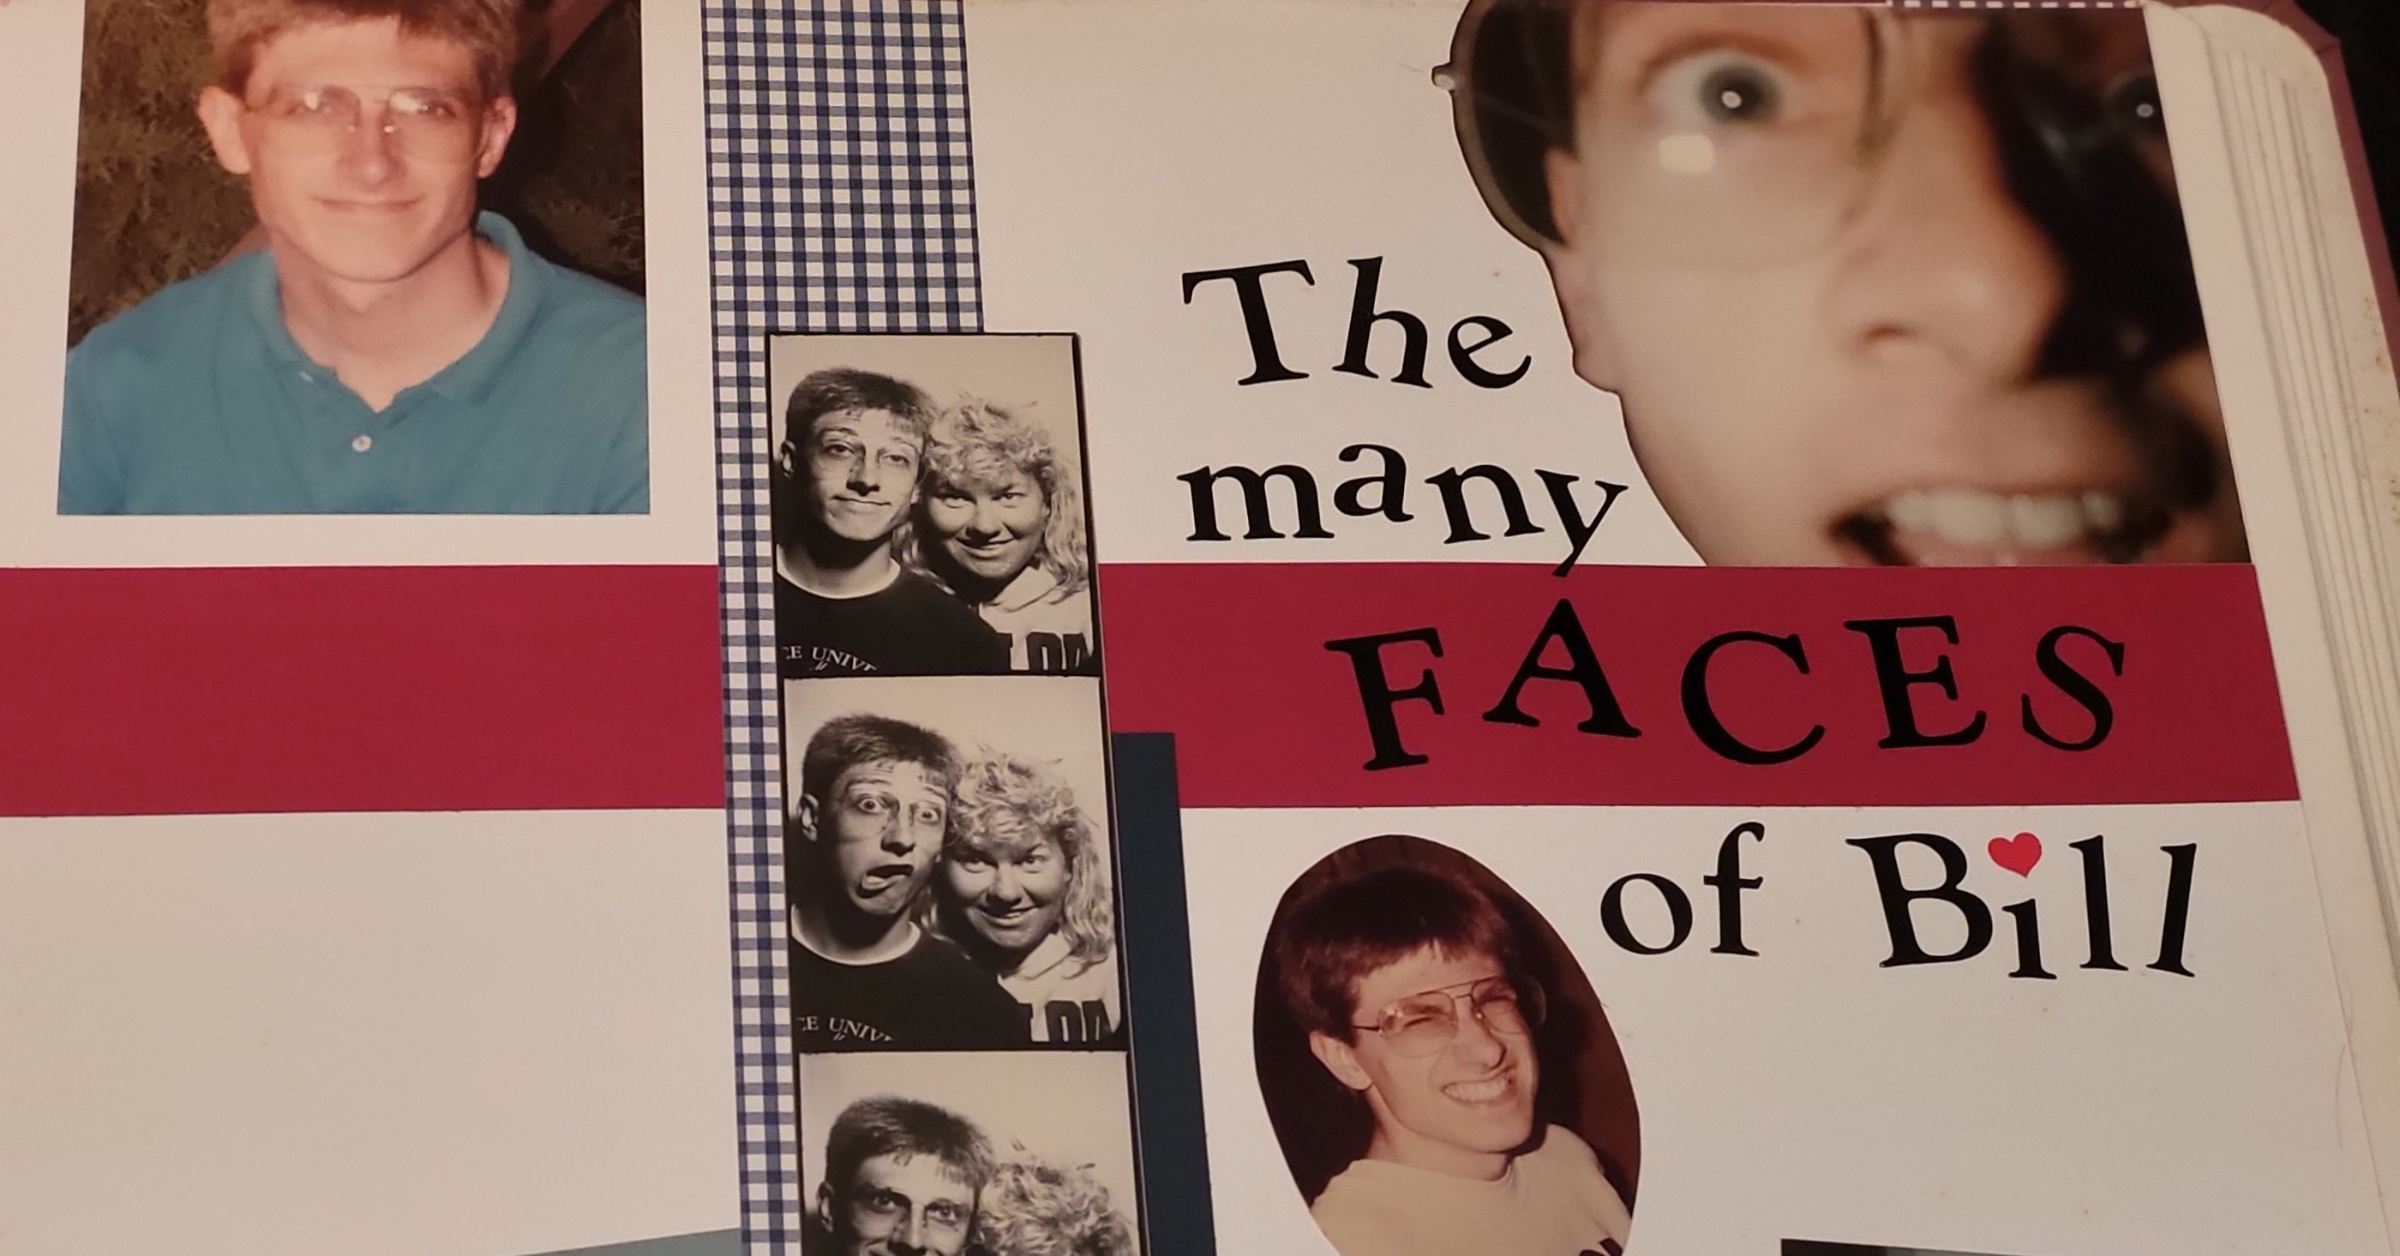 A scrapbook page with the title "the many faces of Bill" showing him with serious and silly faces.